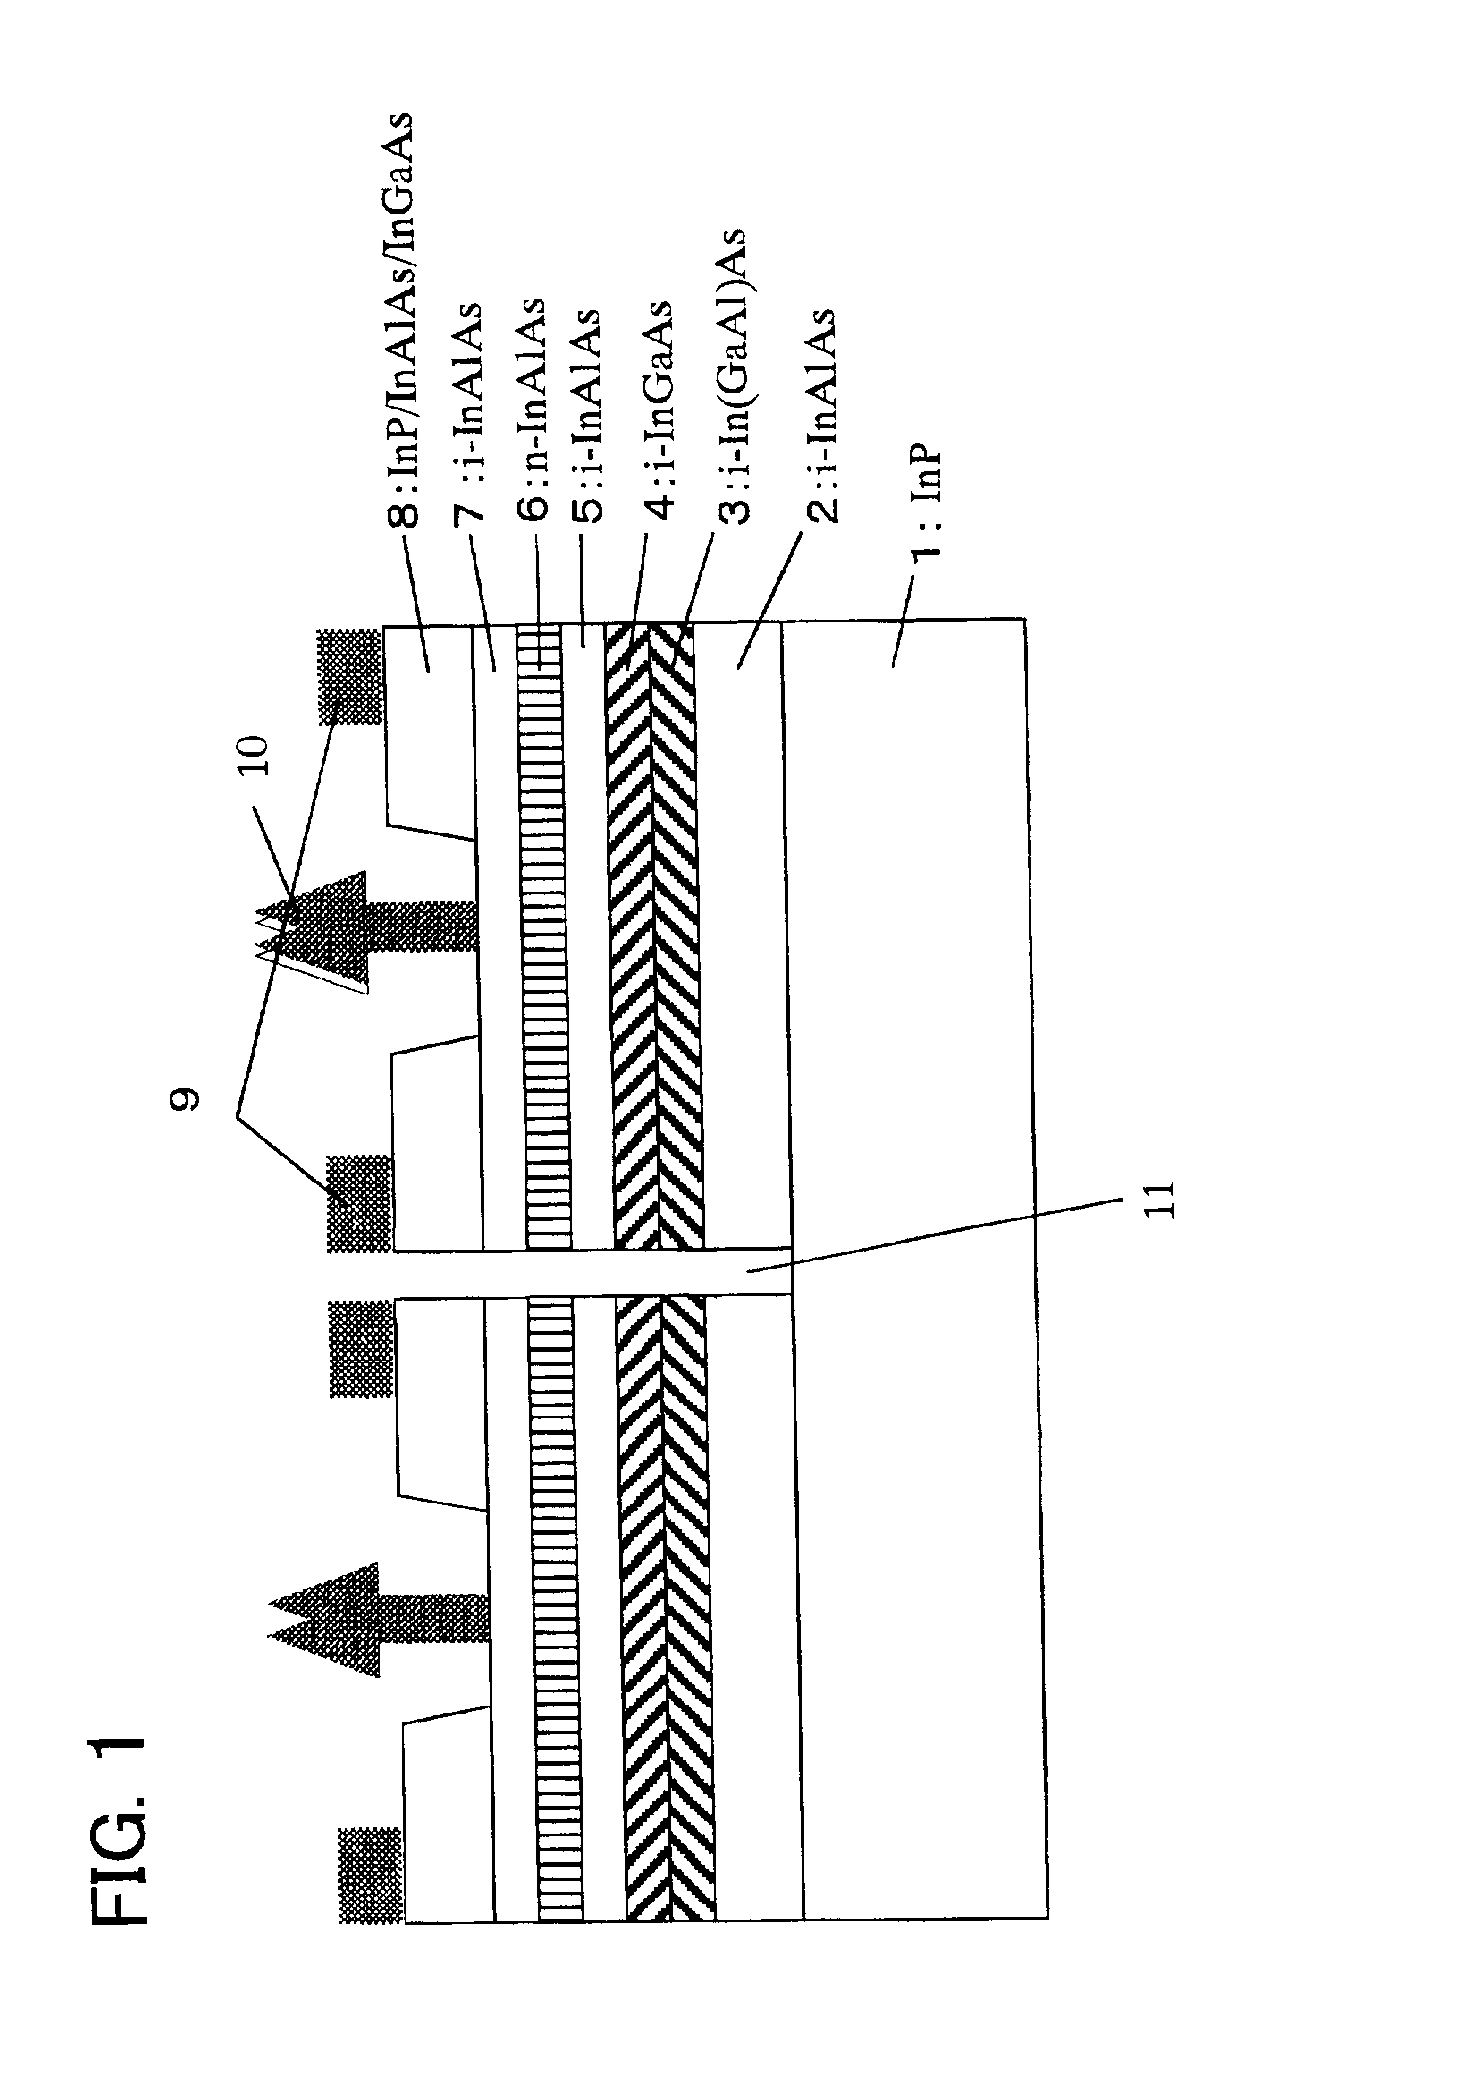 Field-effect transistor using a group III-V compound semiconductor